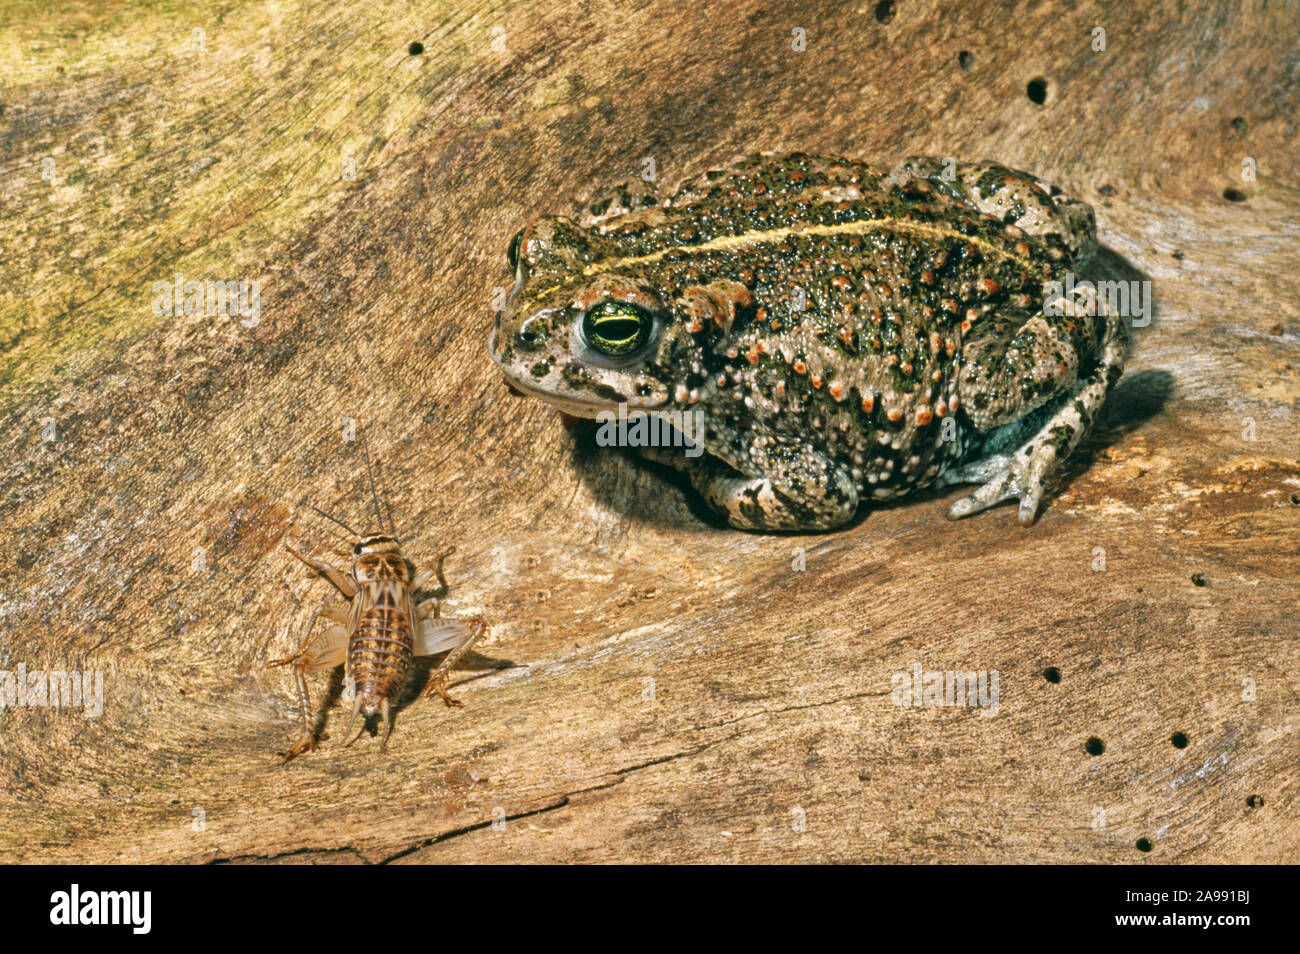 NATTERJACK TOAD  Epidalea (Bufo) calamita,  about to catch insect prey. Native to Western Europe. Stock Photo